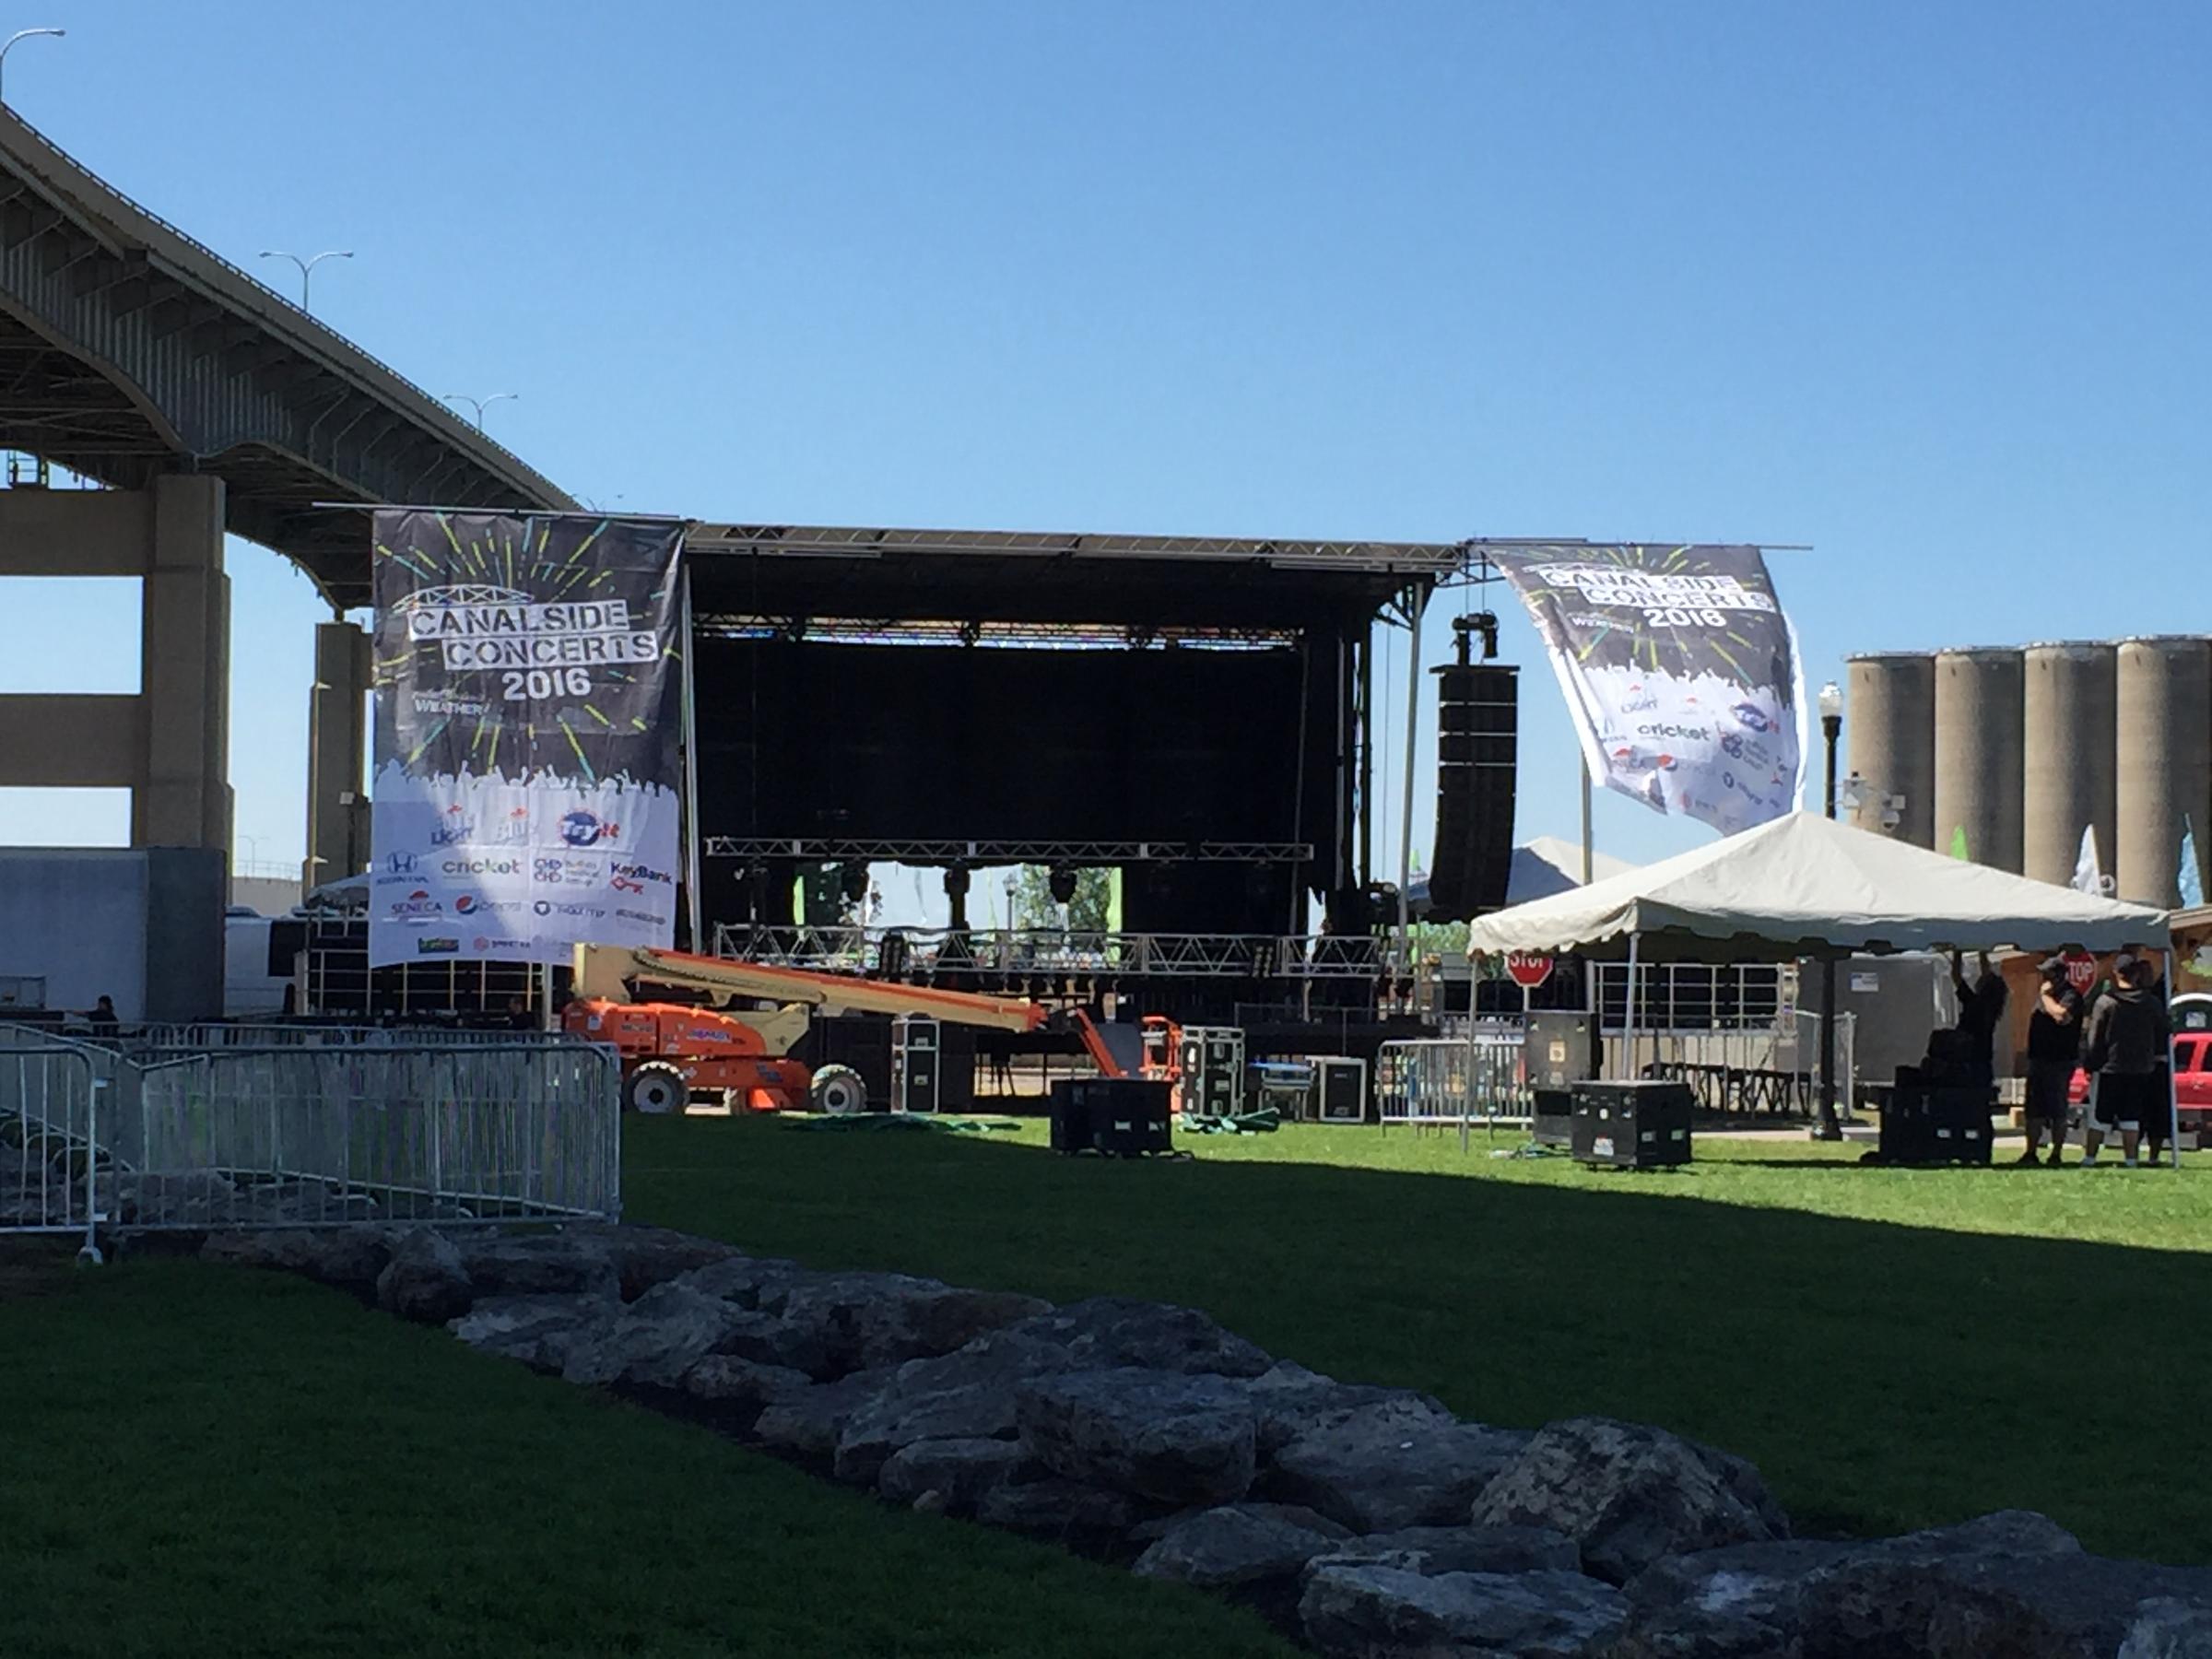 Canalside to debut new increased security with free summer concert